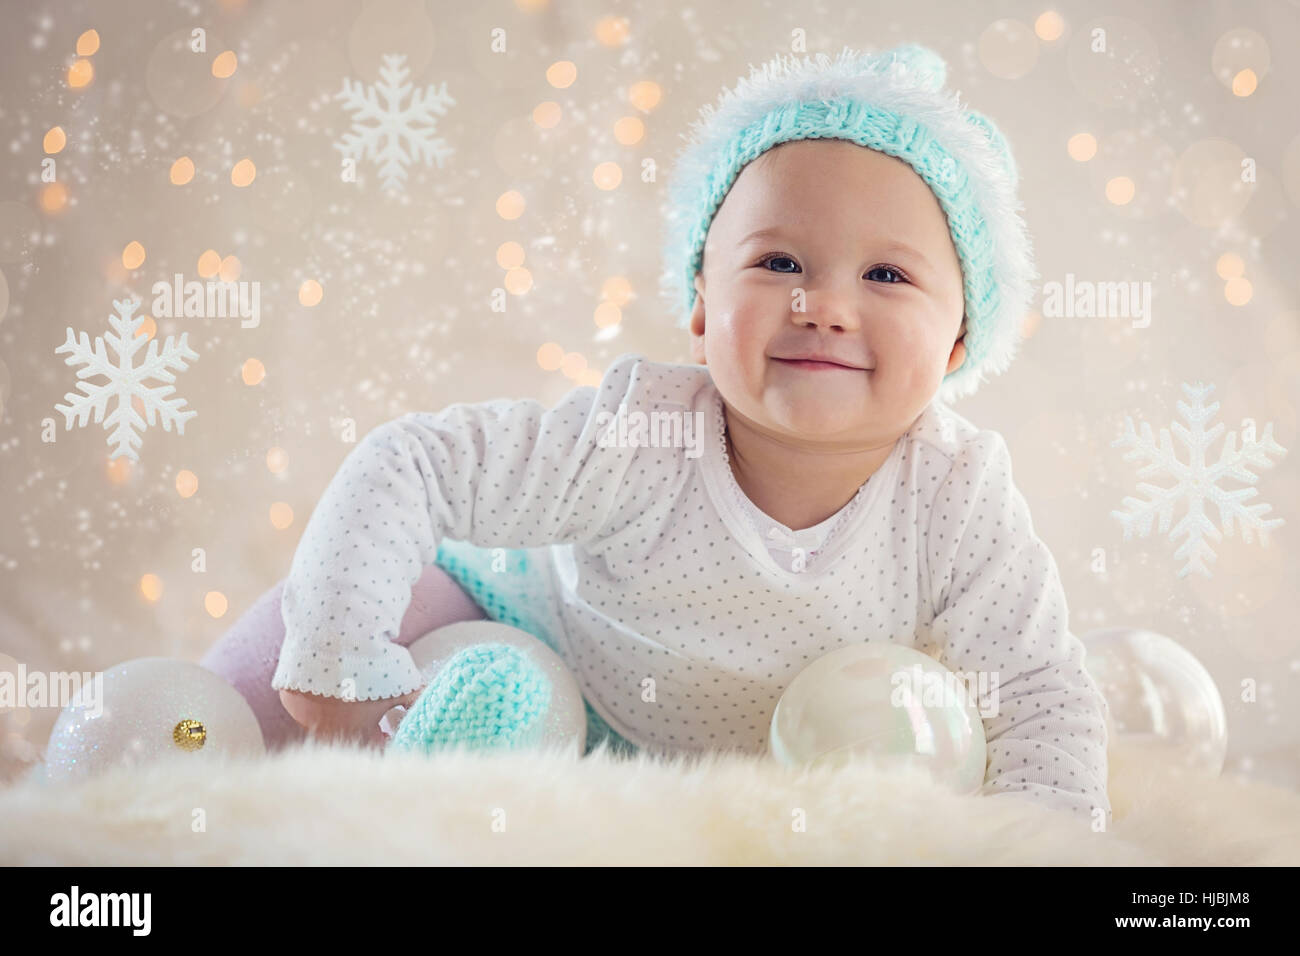 Cute Baby girl posing and smiling with Christmas snowflake ornaments and balls Stock Photo